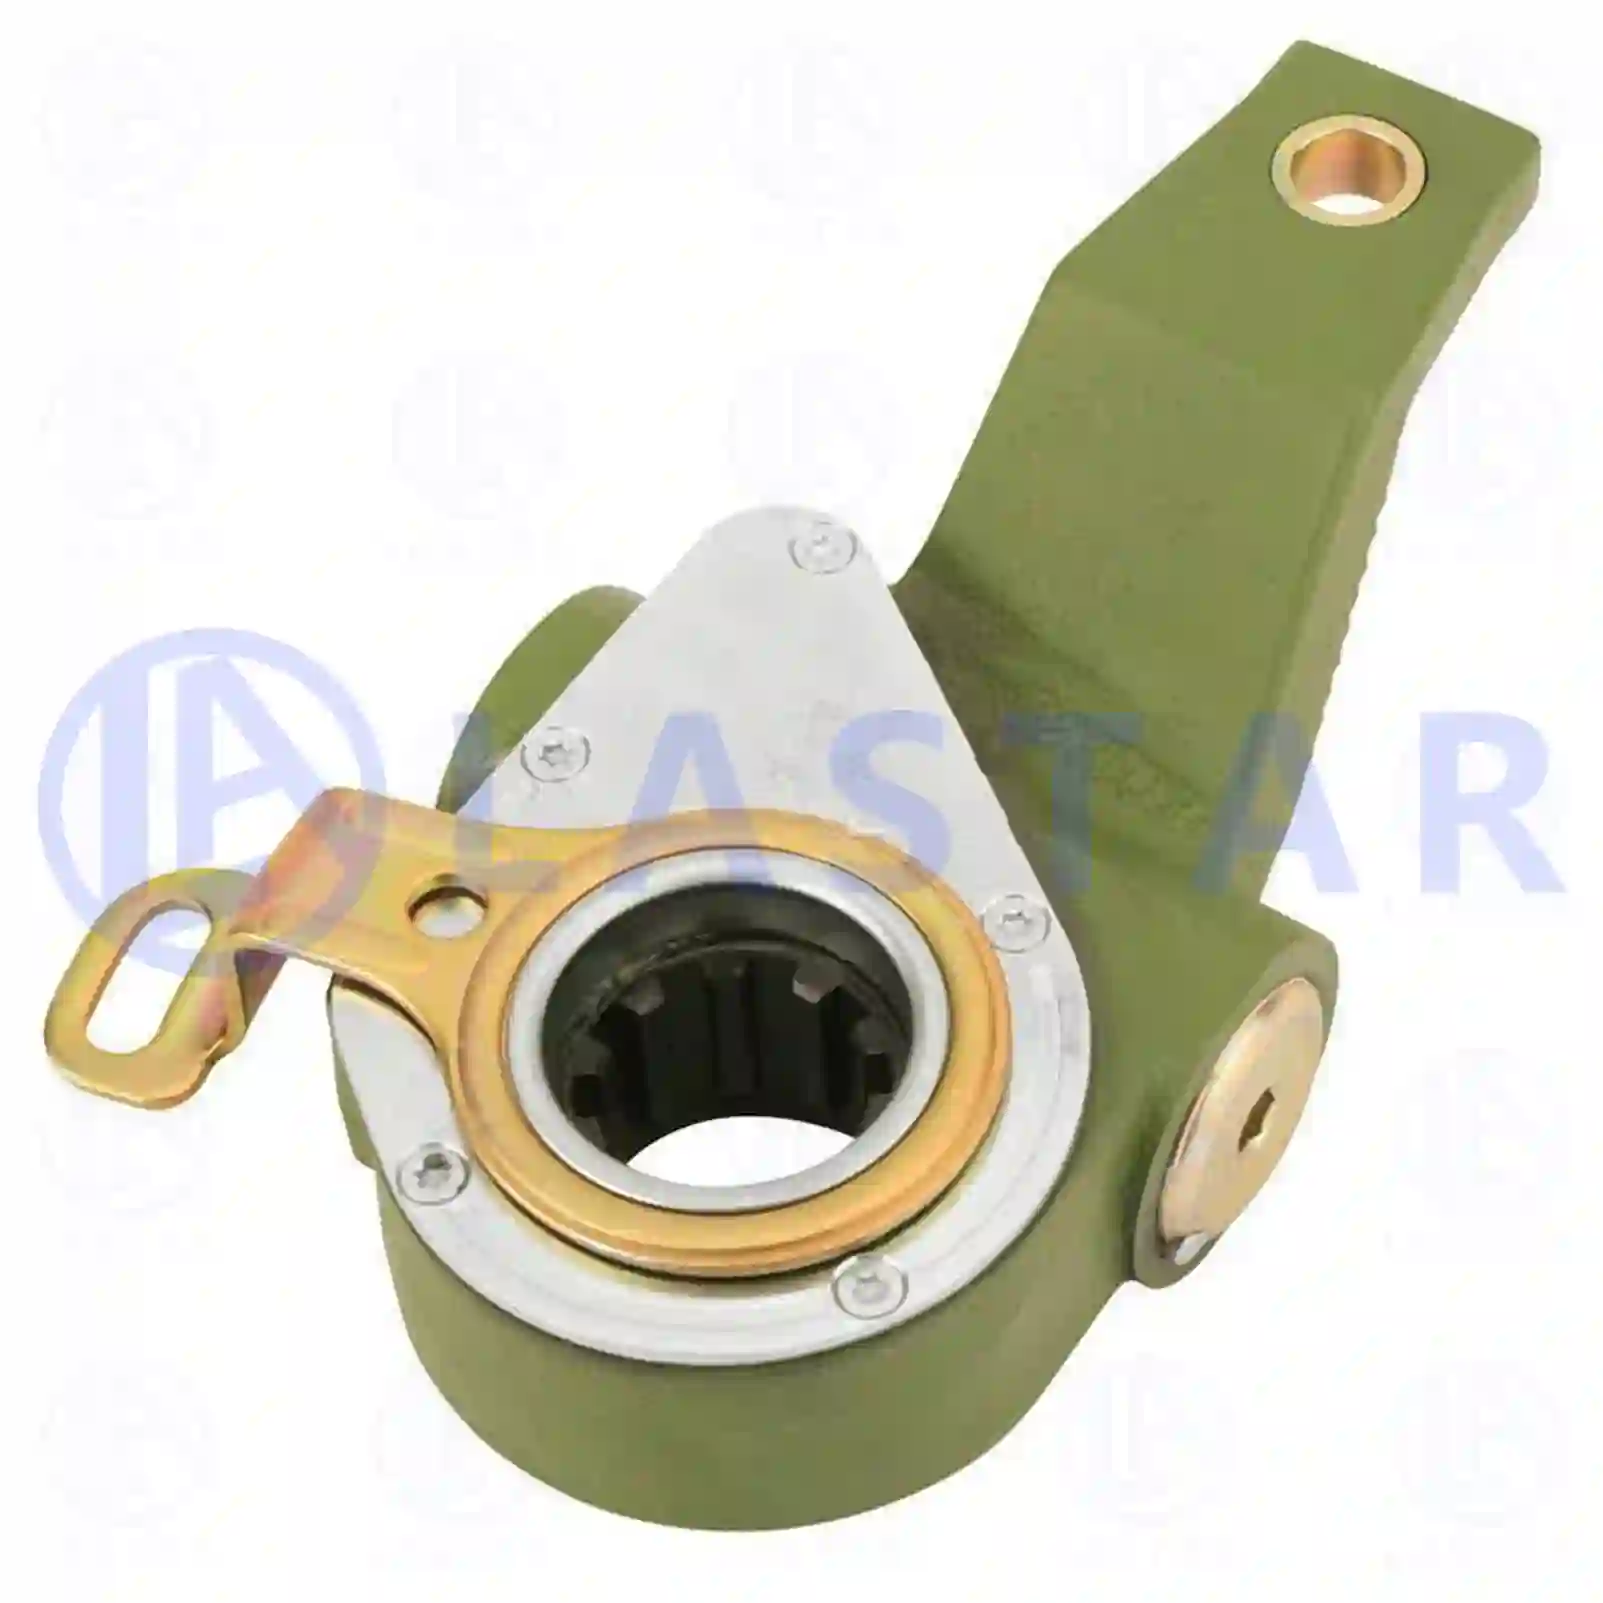 Slack adjuster, automatic, right, 77715916, 0159556, 0159556R, 0278350, 159556, 159556A, 159556R, 278350 ||  77715916 Lastar Spare Part | Truck Spare Parts, Auotomotive Spare Parts Slack adjuster, automatic, right, 77715916, 0159556, 0159556R, 0278350, 159556, 159556A, 159556R, 278350 ||  77715916 Lastar Spare Part | Truck Spare Parts, Auotomotive Spare Parts